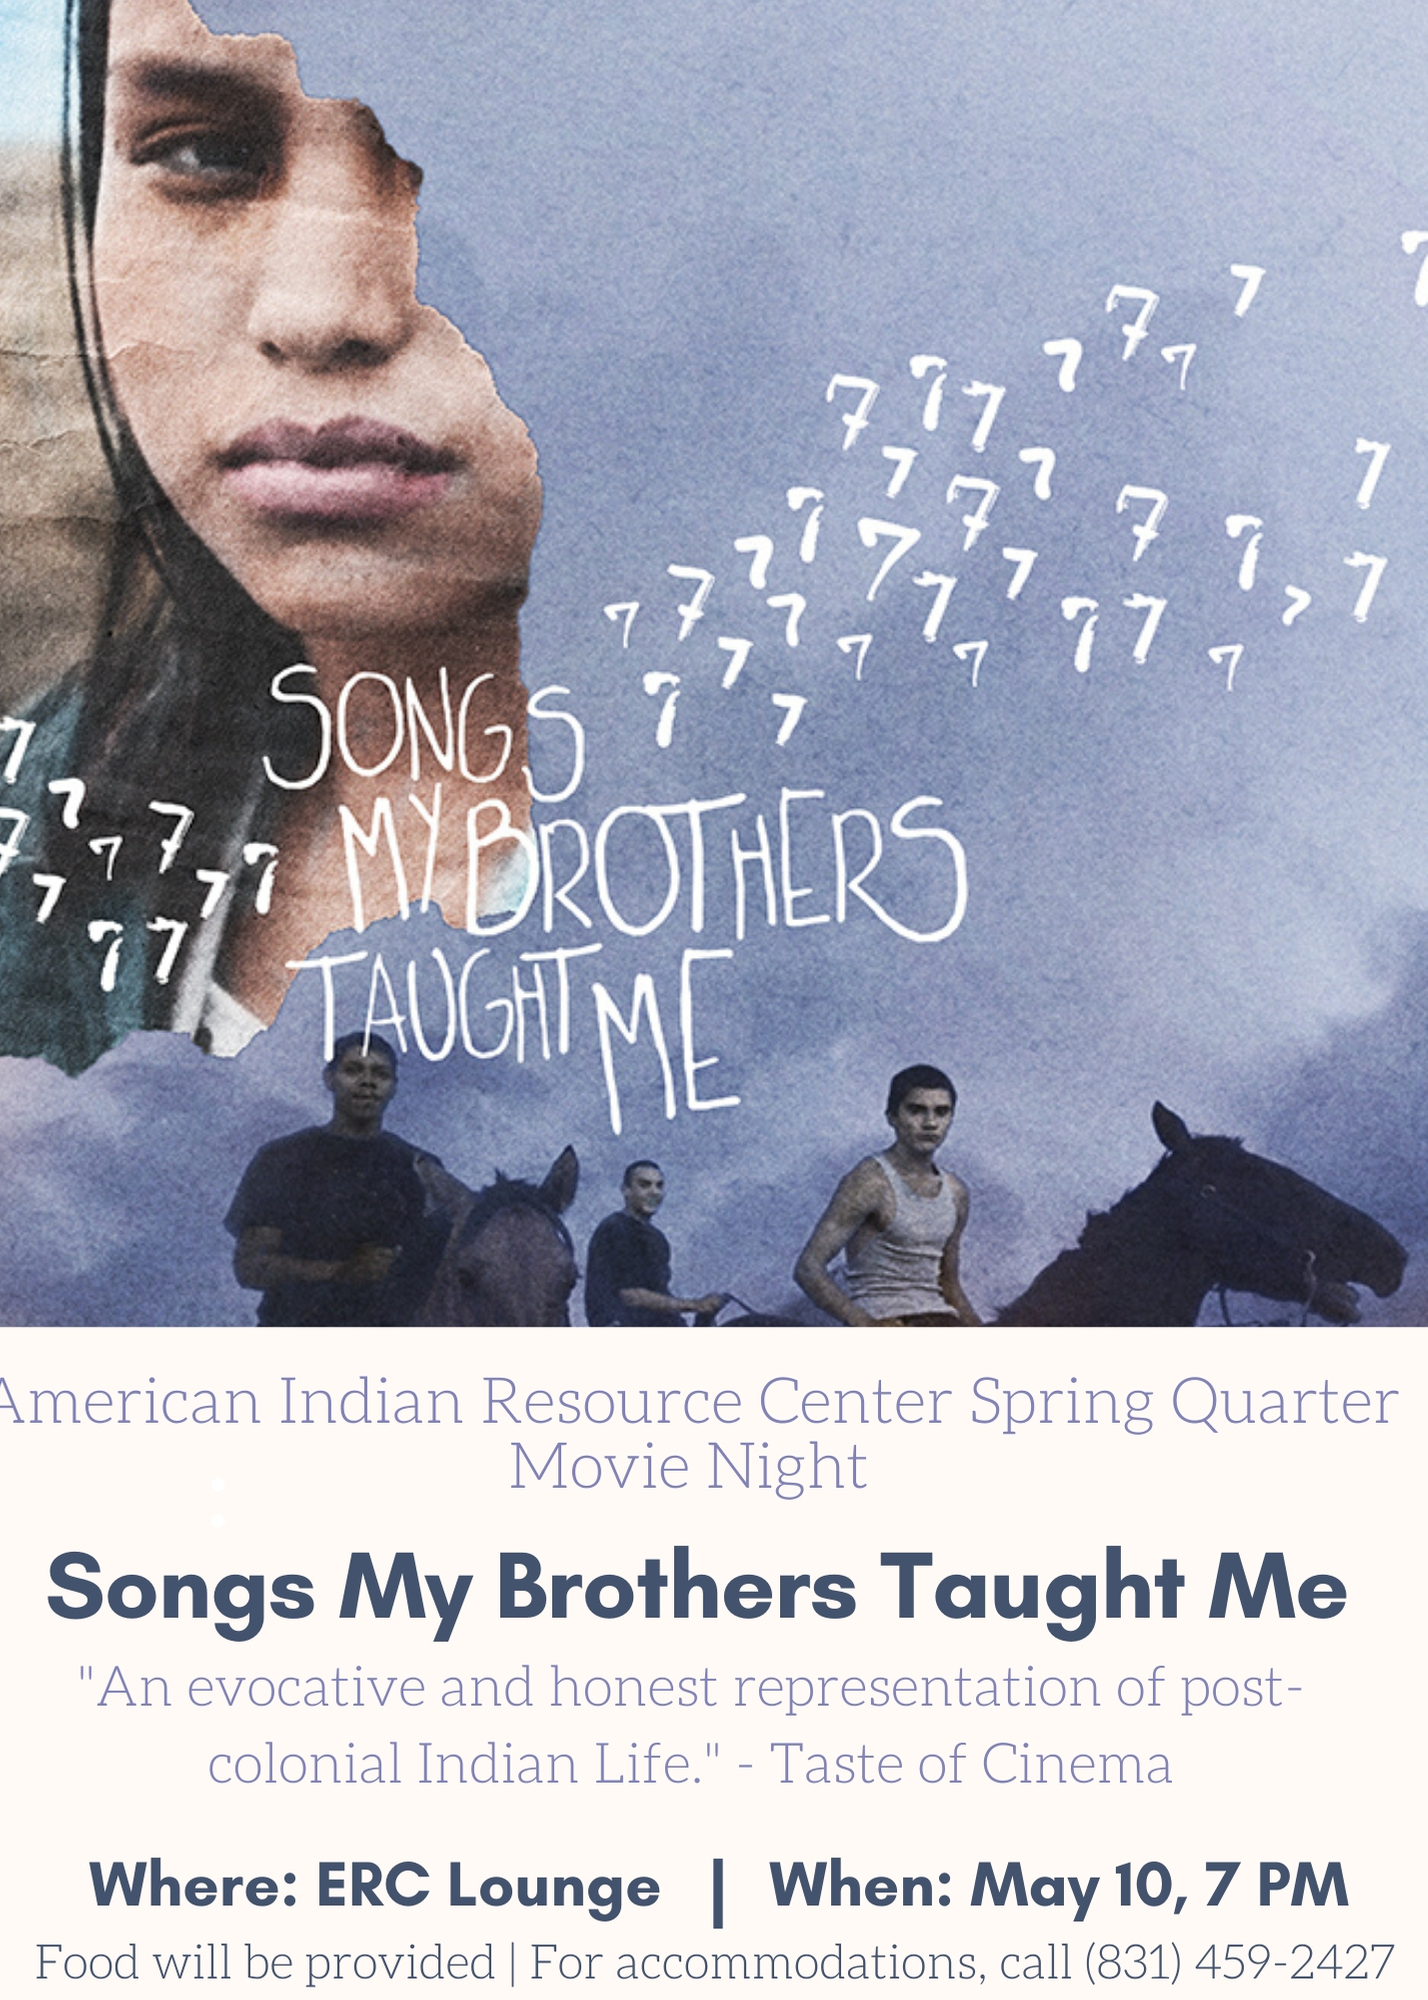 AIRC Spring Quarter Movie Nights: Songs My Brothers Taught Me